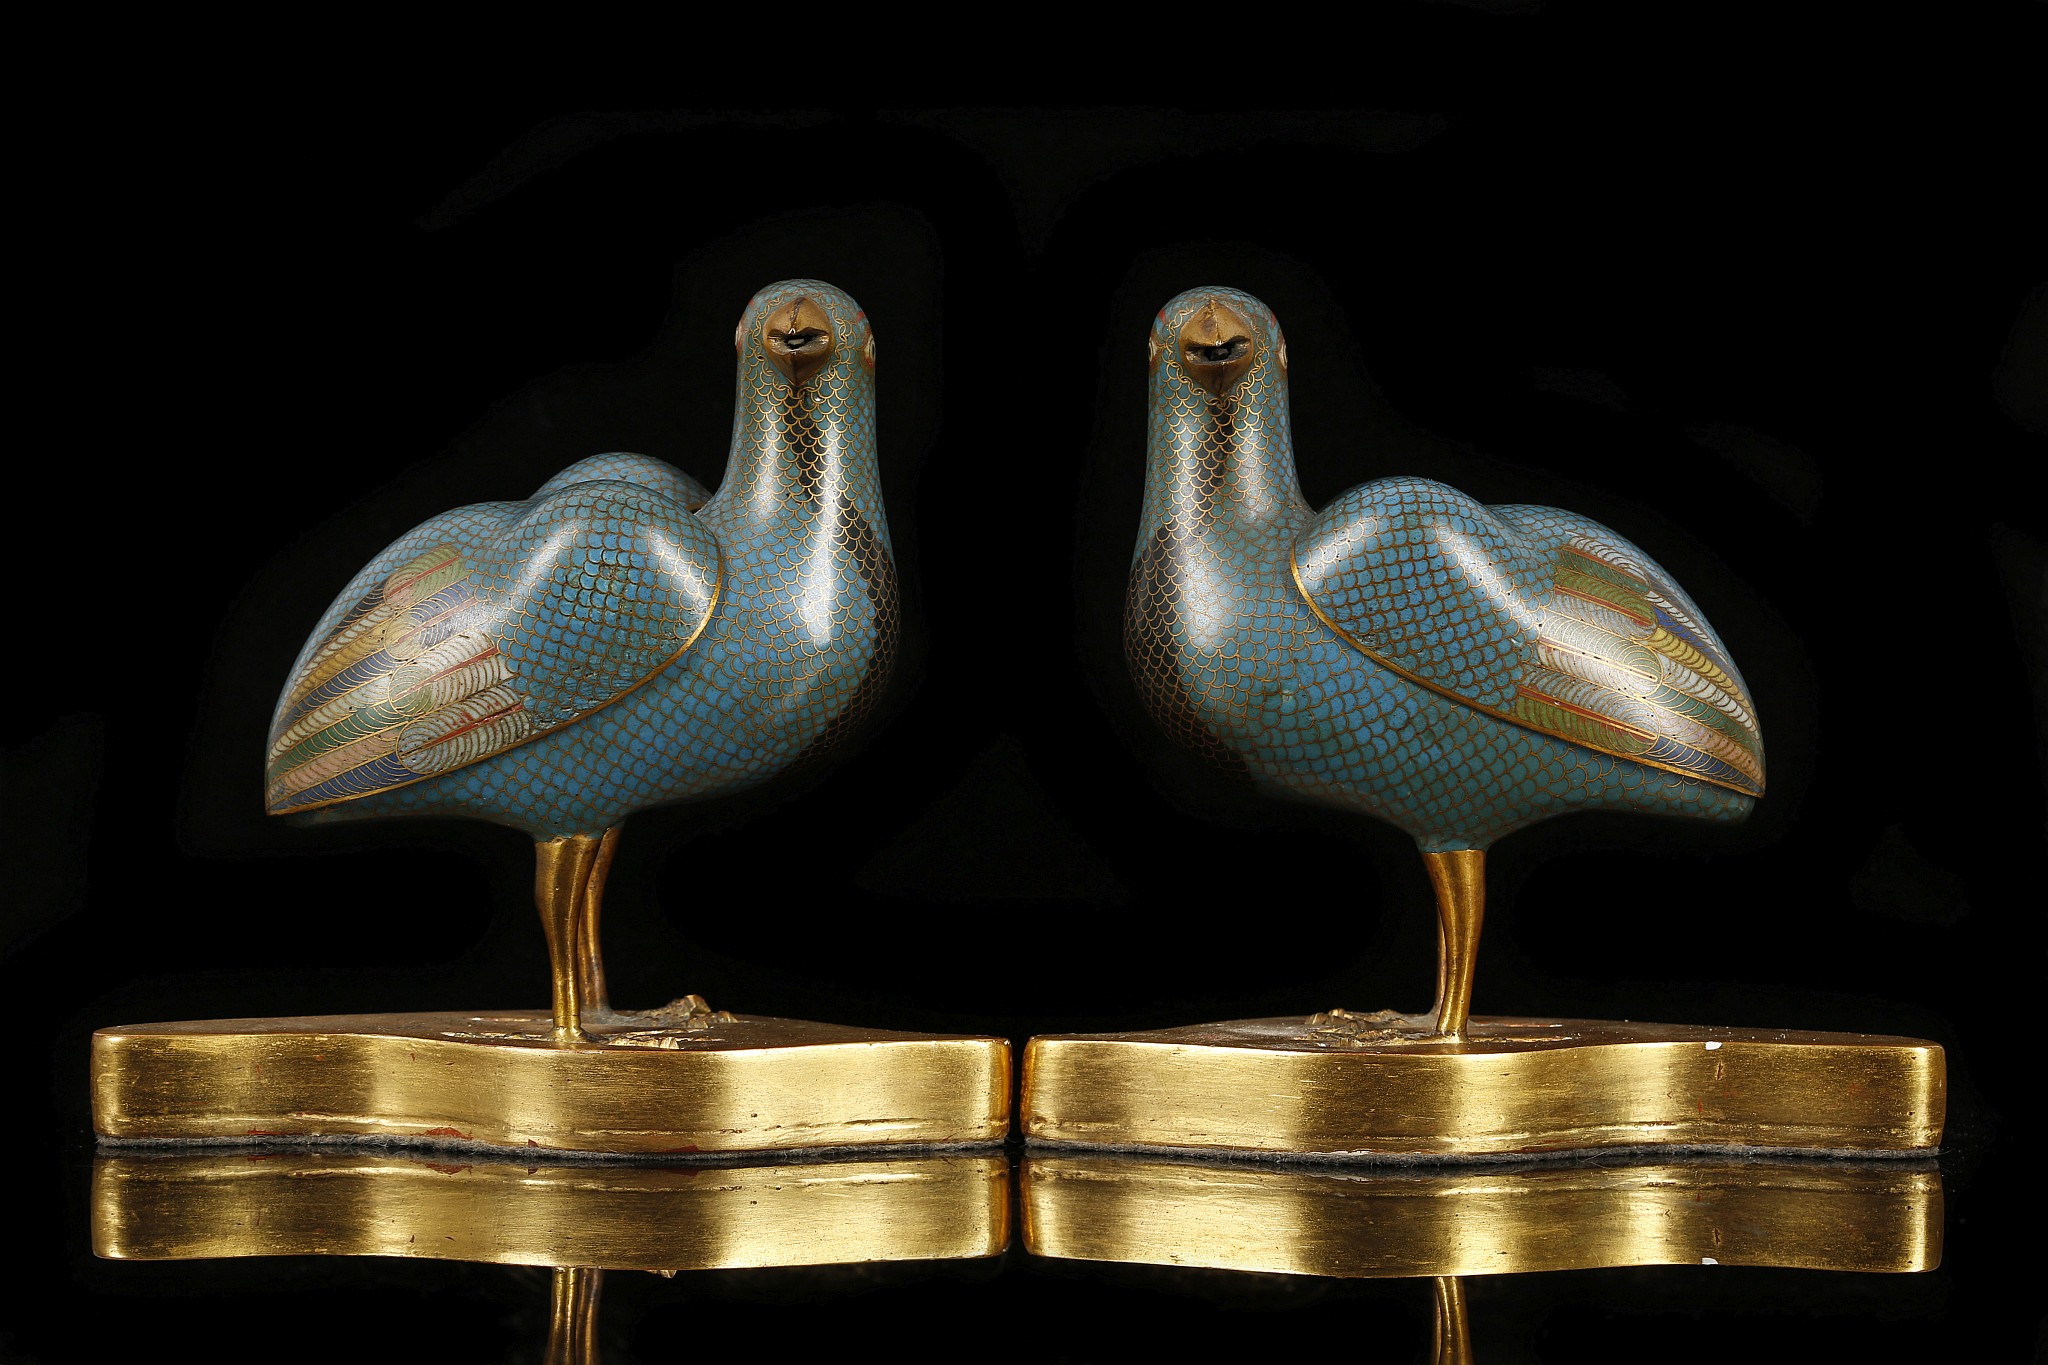 A PAIR OF CHINESE CLOISONNÉ ENAMEL ‘QUAIL’ CENSERS AND COVERS. Qing Dynasty, 18th Century. Decorated